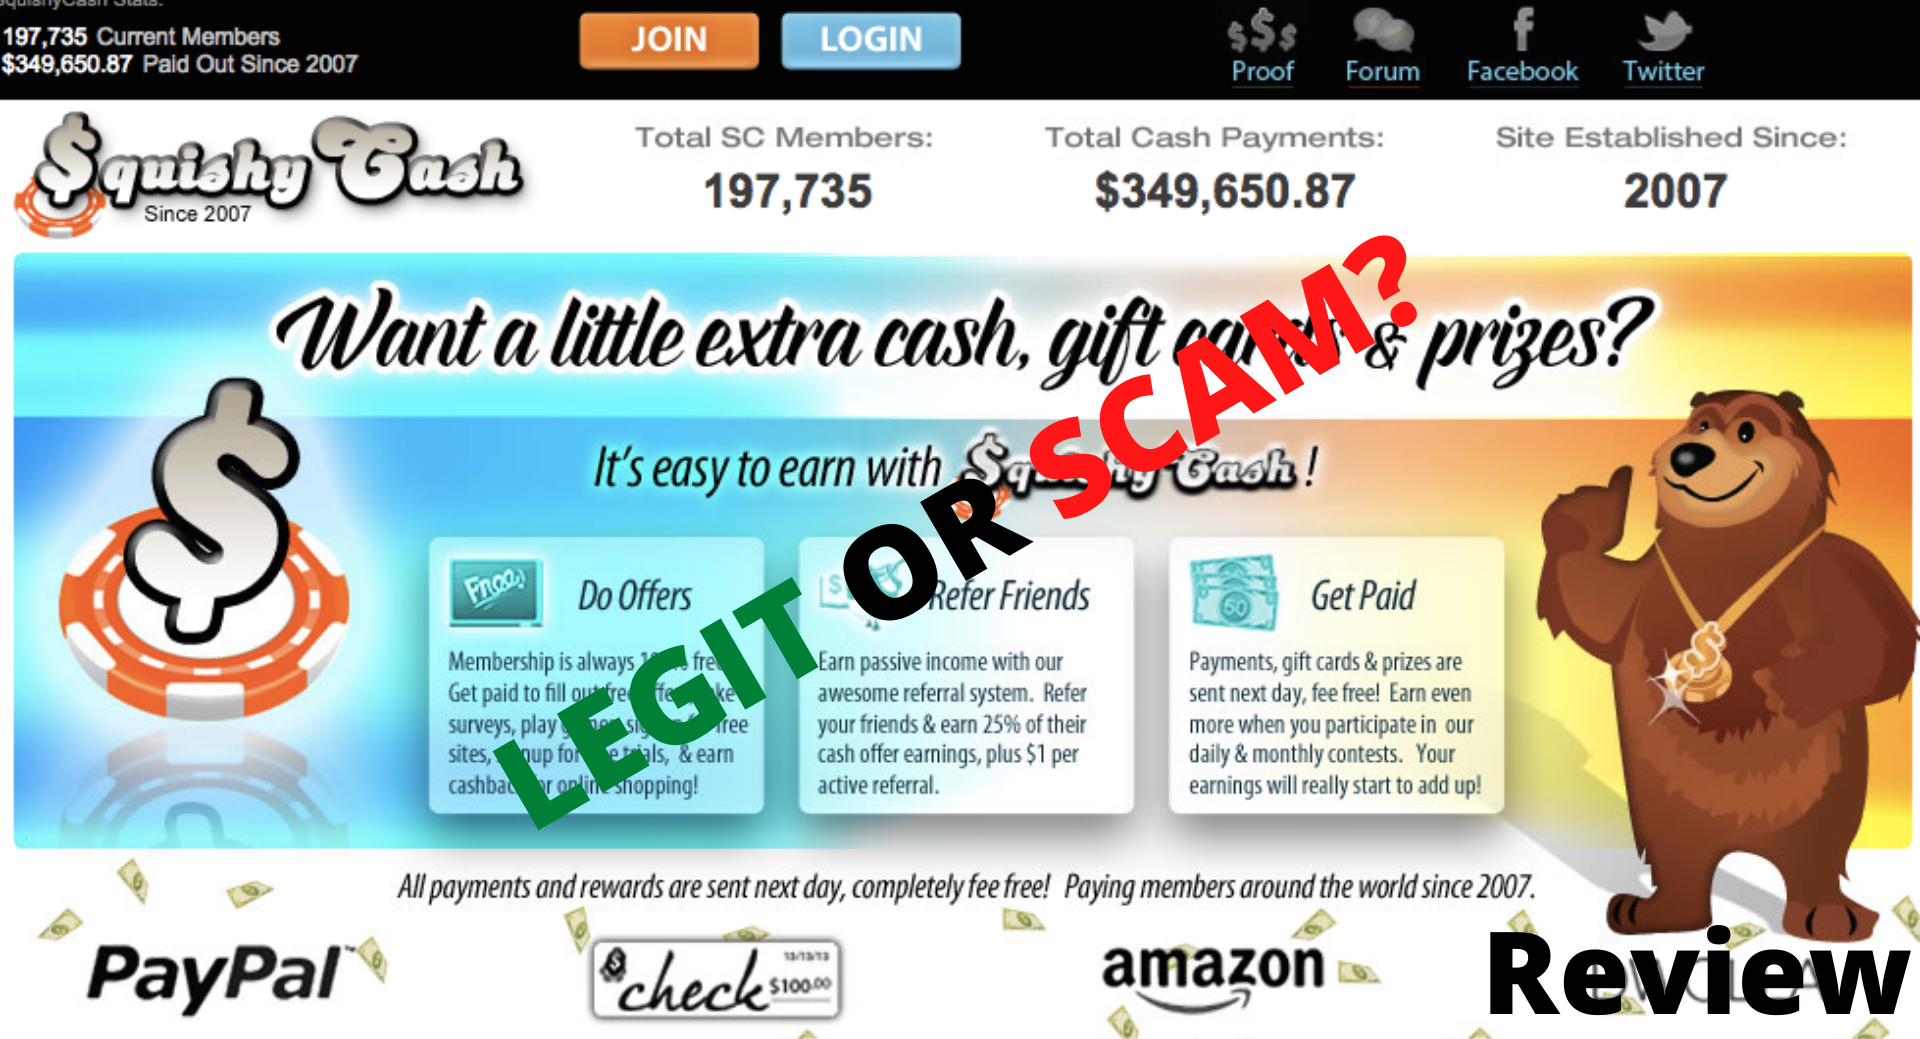 Squishy Cash review: Is Squishy Cash a Scam?